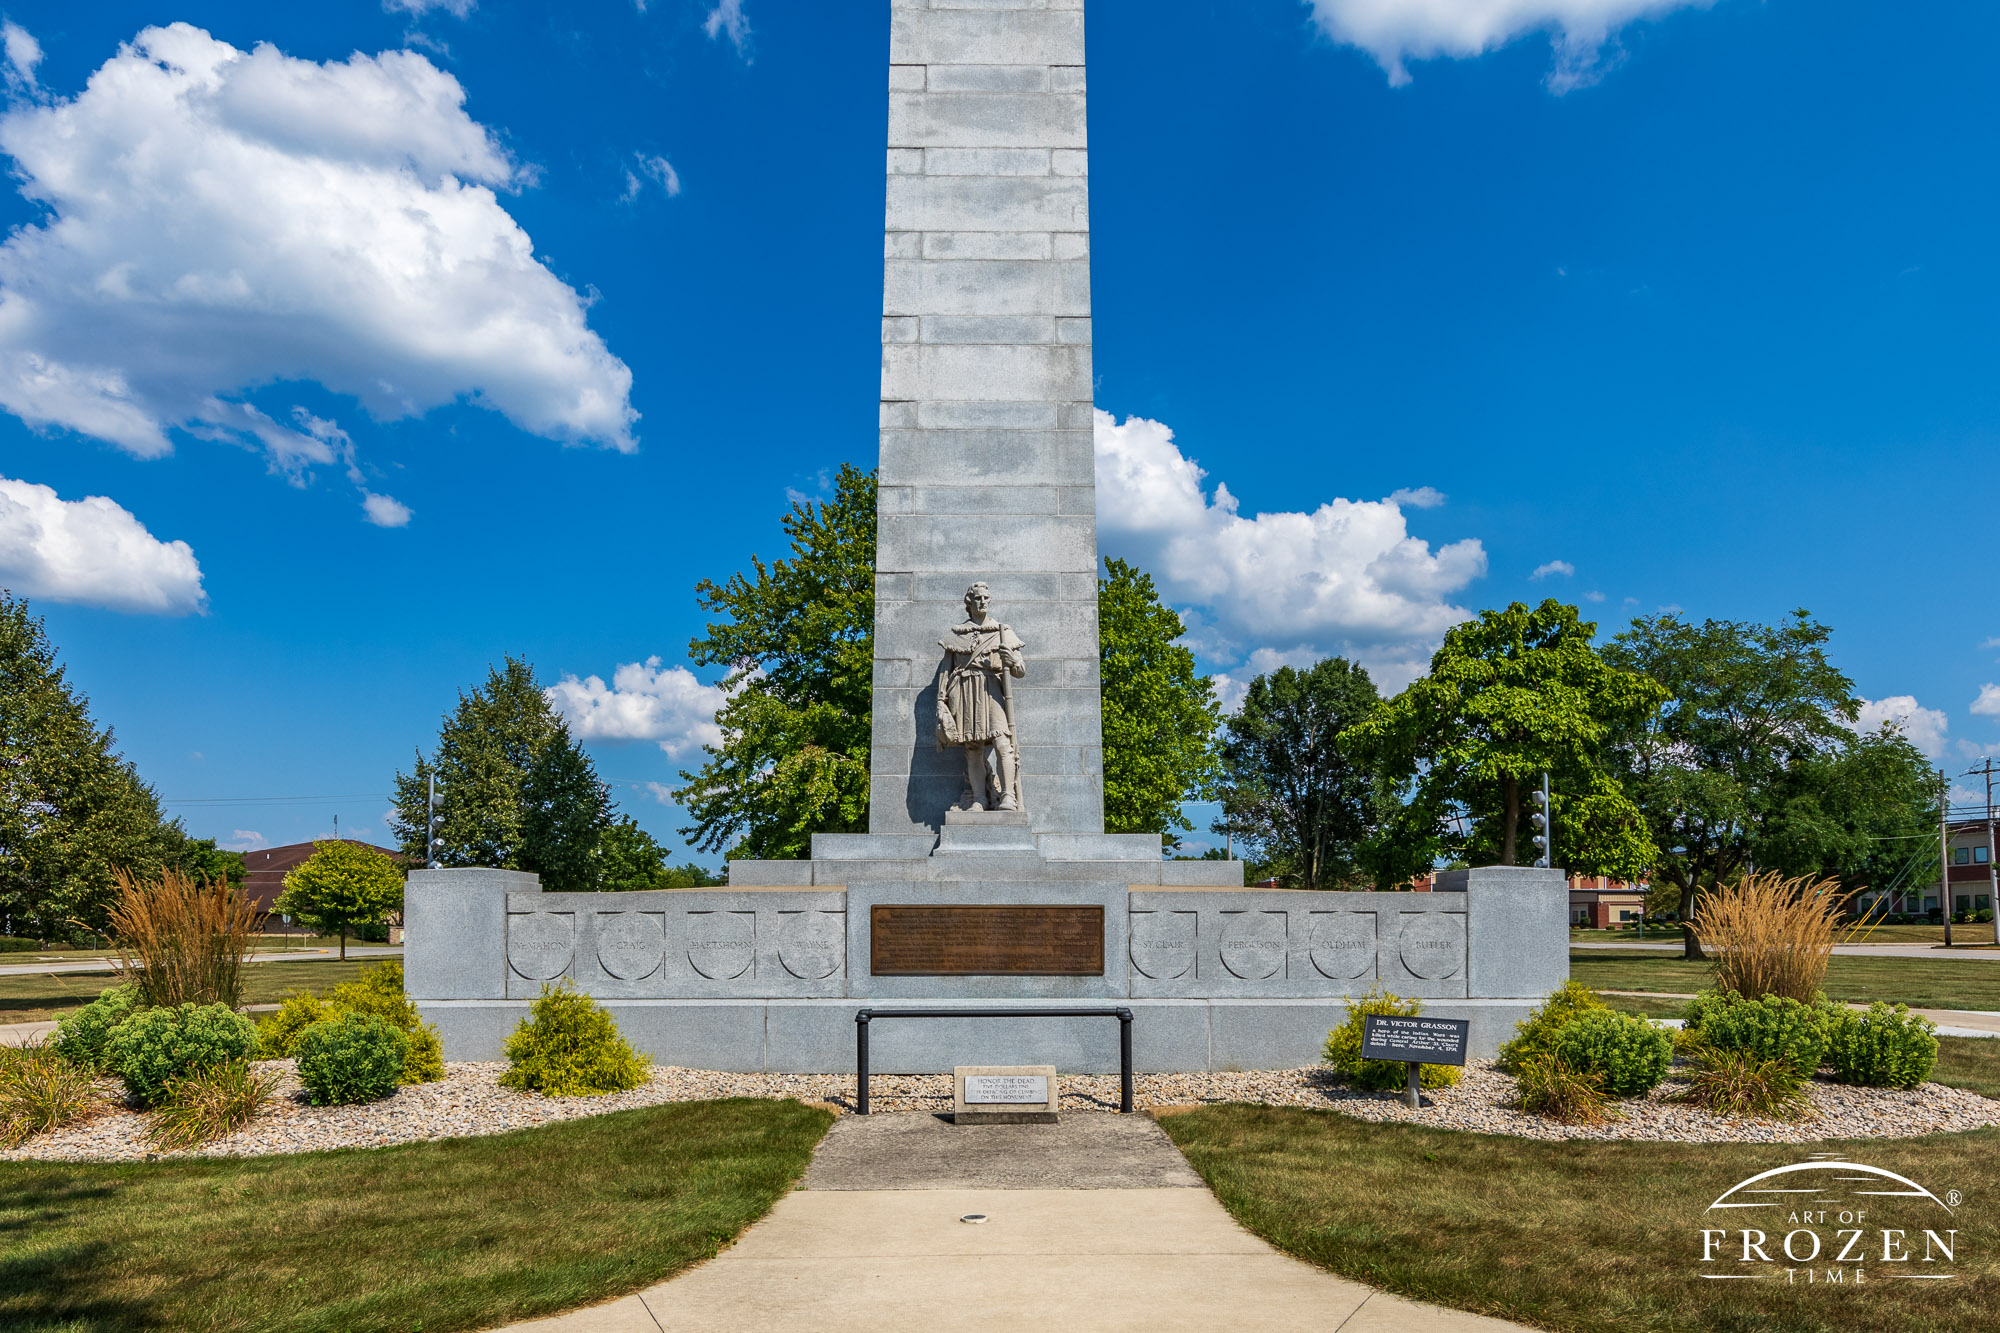 Fort Recovery State memorial obelisk celebrates the soldiers who sacrificed their lives in building this nation